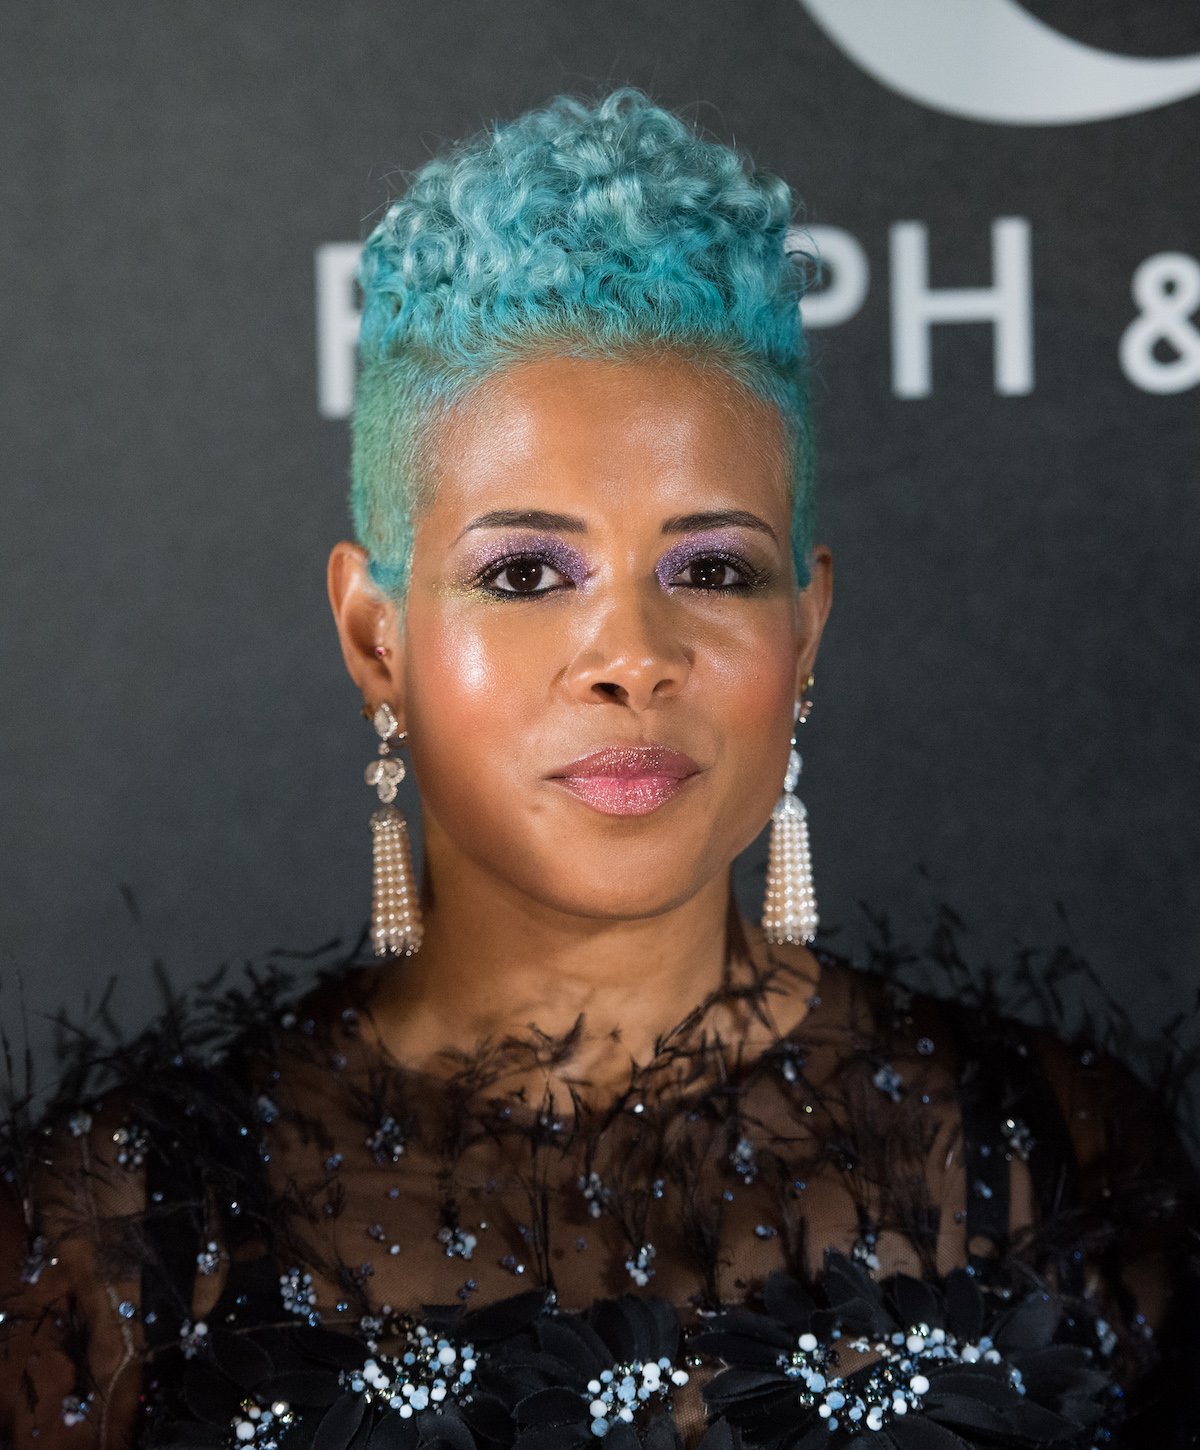 Of kelis pictures 20 Of